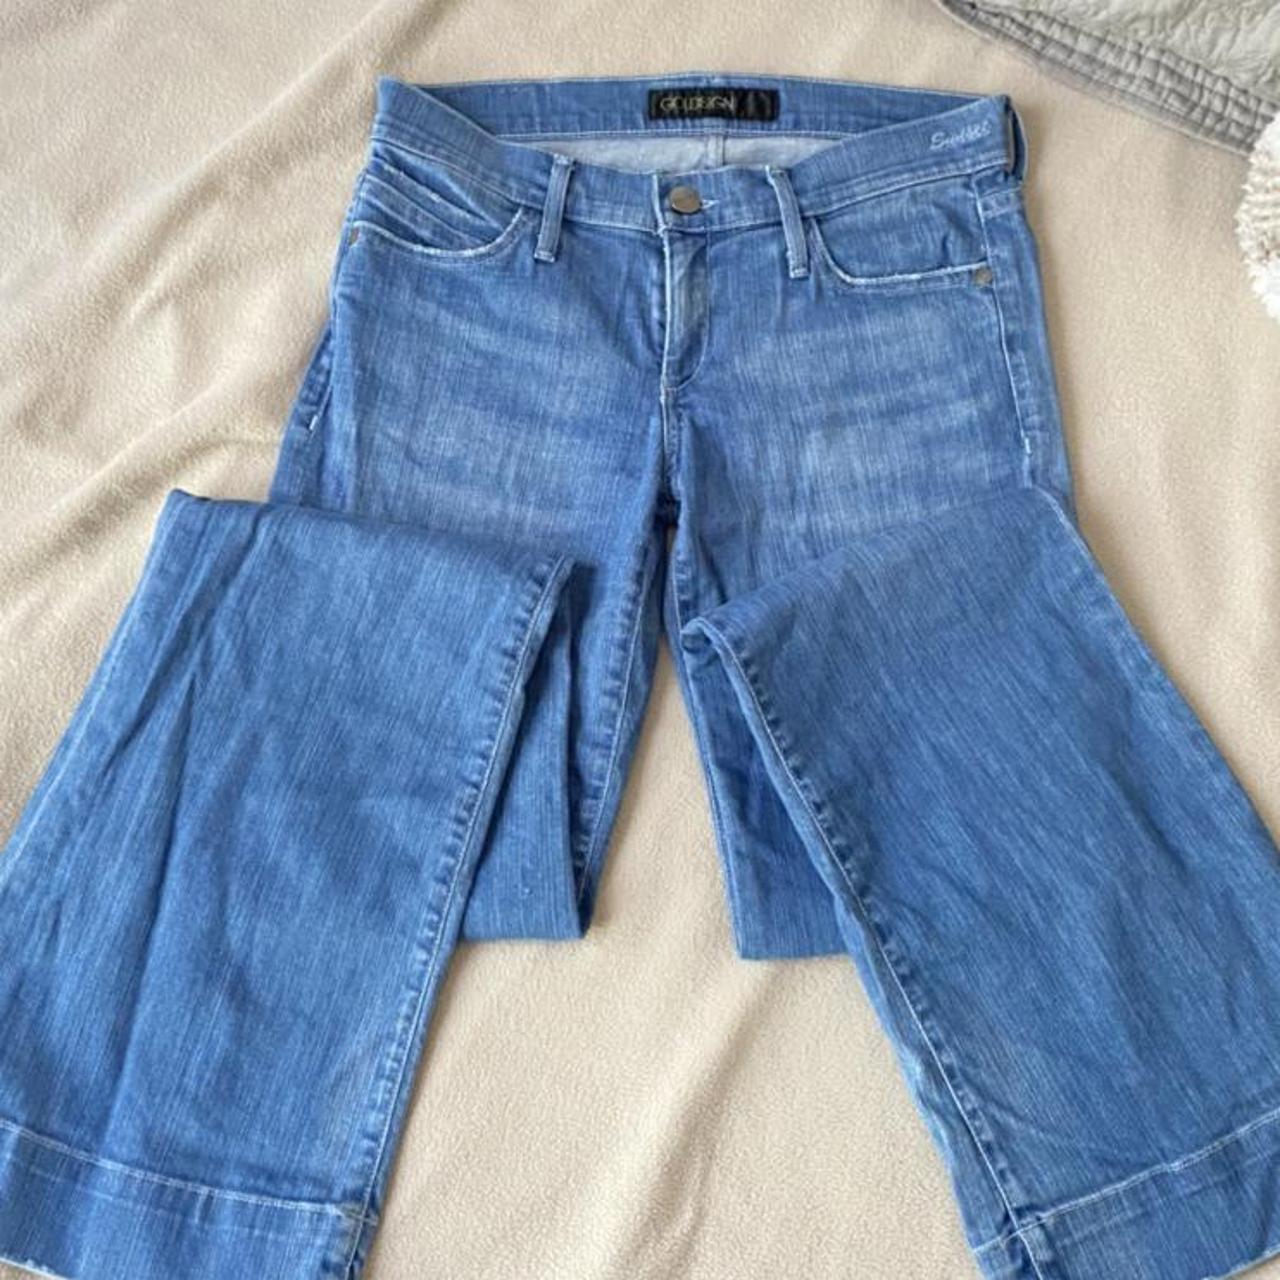 Product Image 2 - Jeans size 27 but could